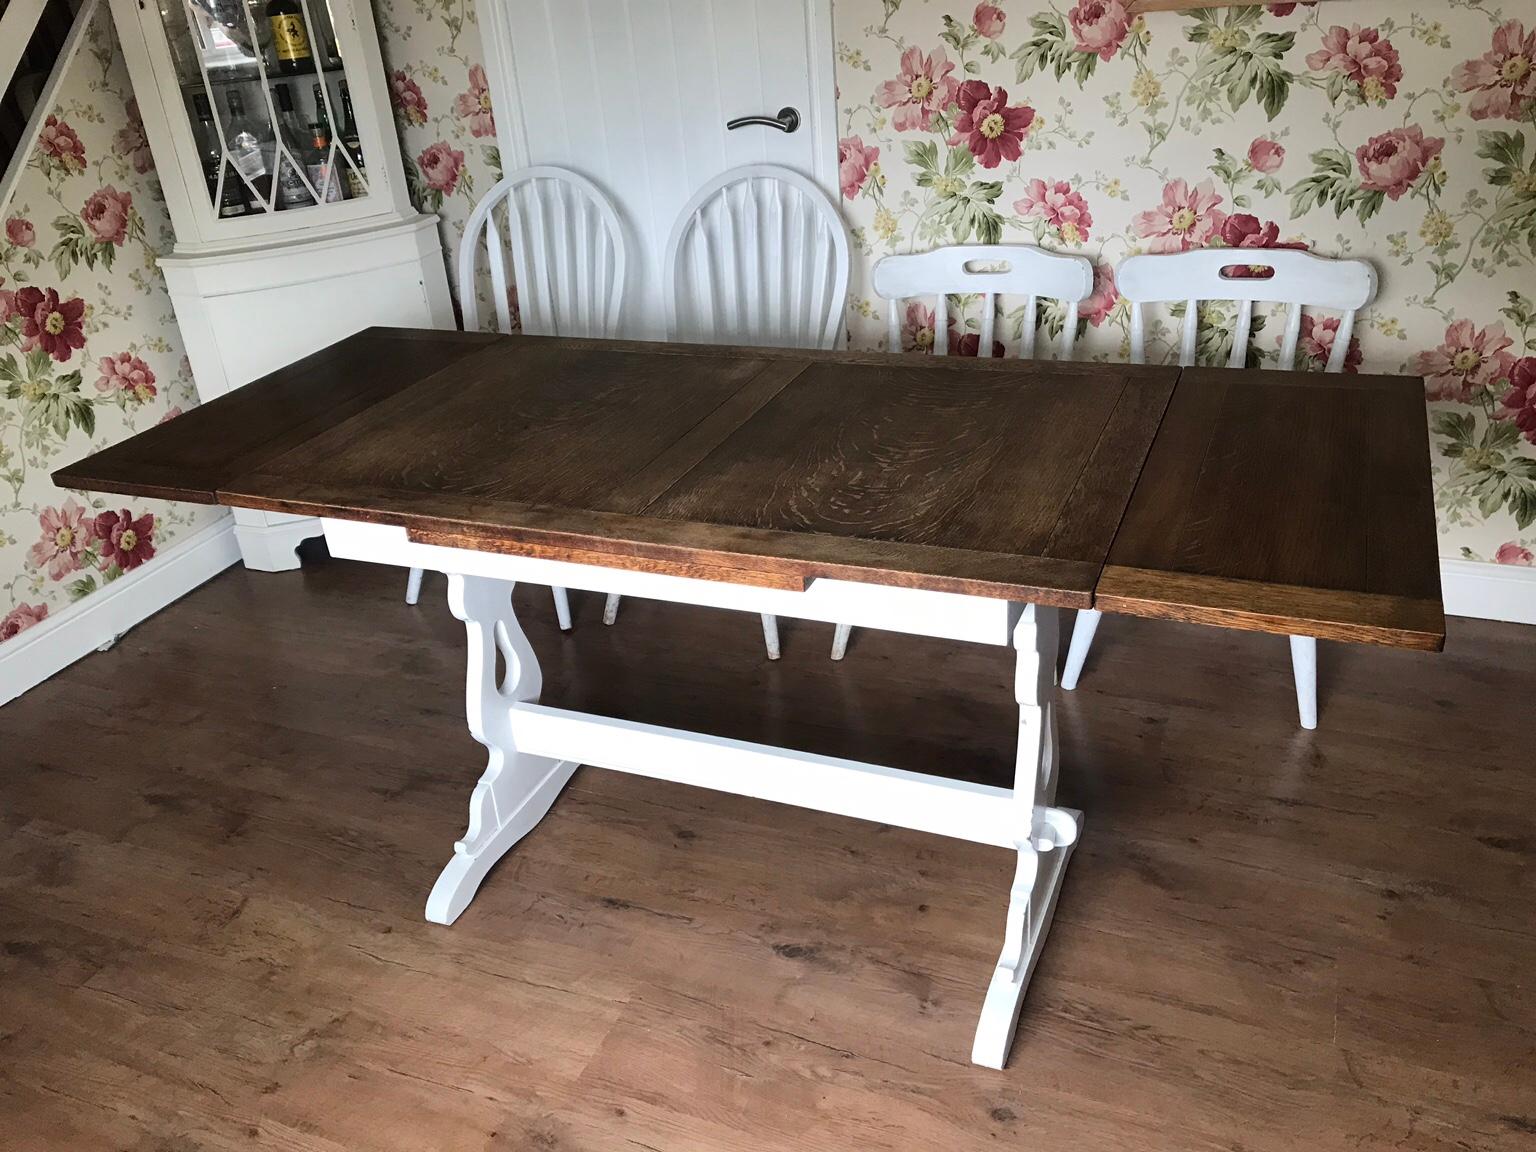 Solid Wooden Extending Table And Chairs In Wa7 Weston Fur 150 00